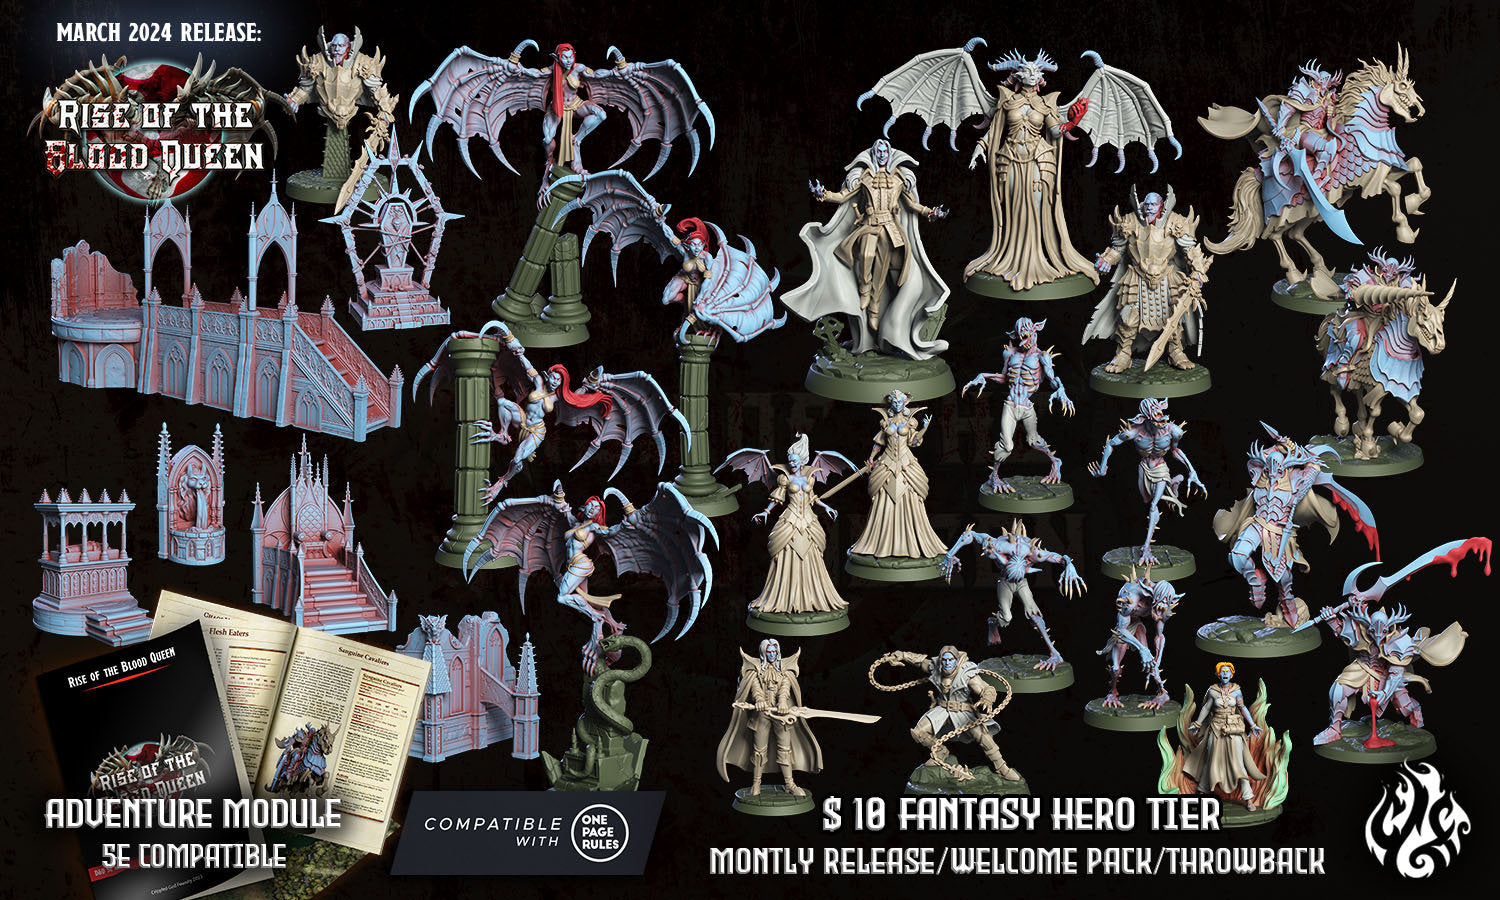 Vampire Spawn - Crippled God Foundry | 32mm | Rise of The Blood Queen | Ghoul | Zombie | Demon | Succubus